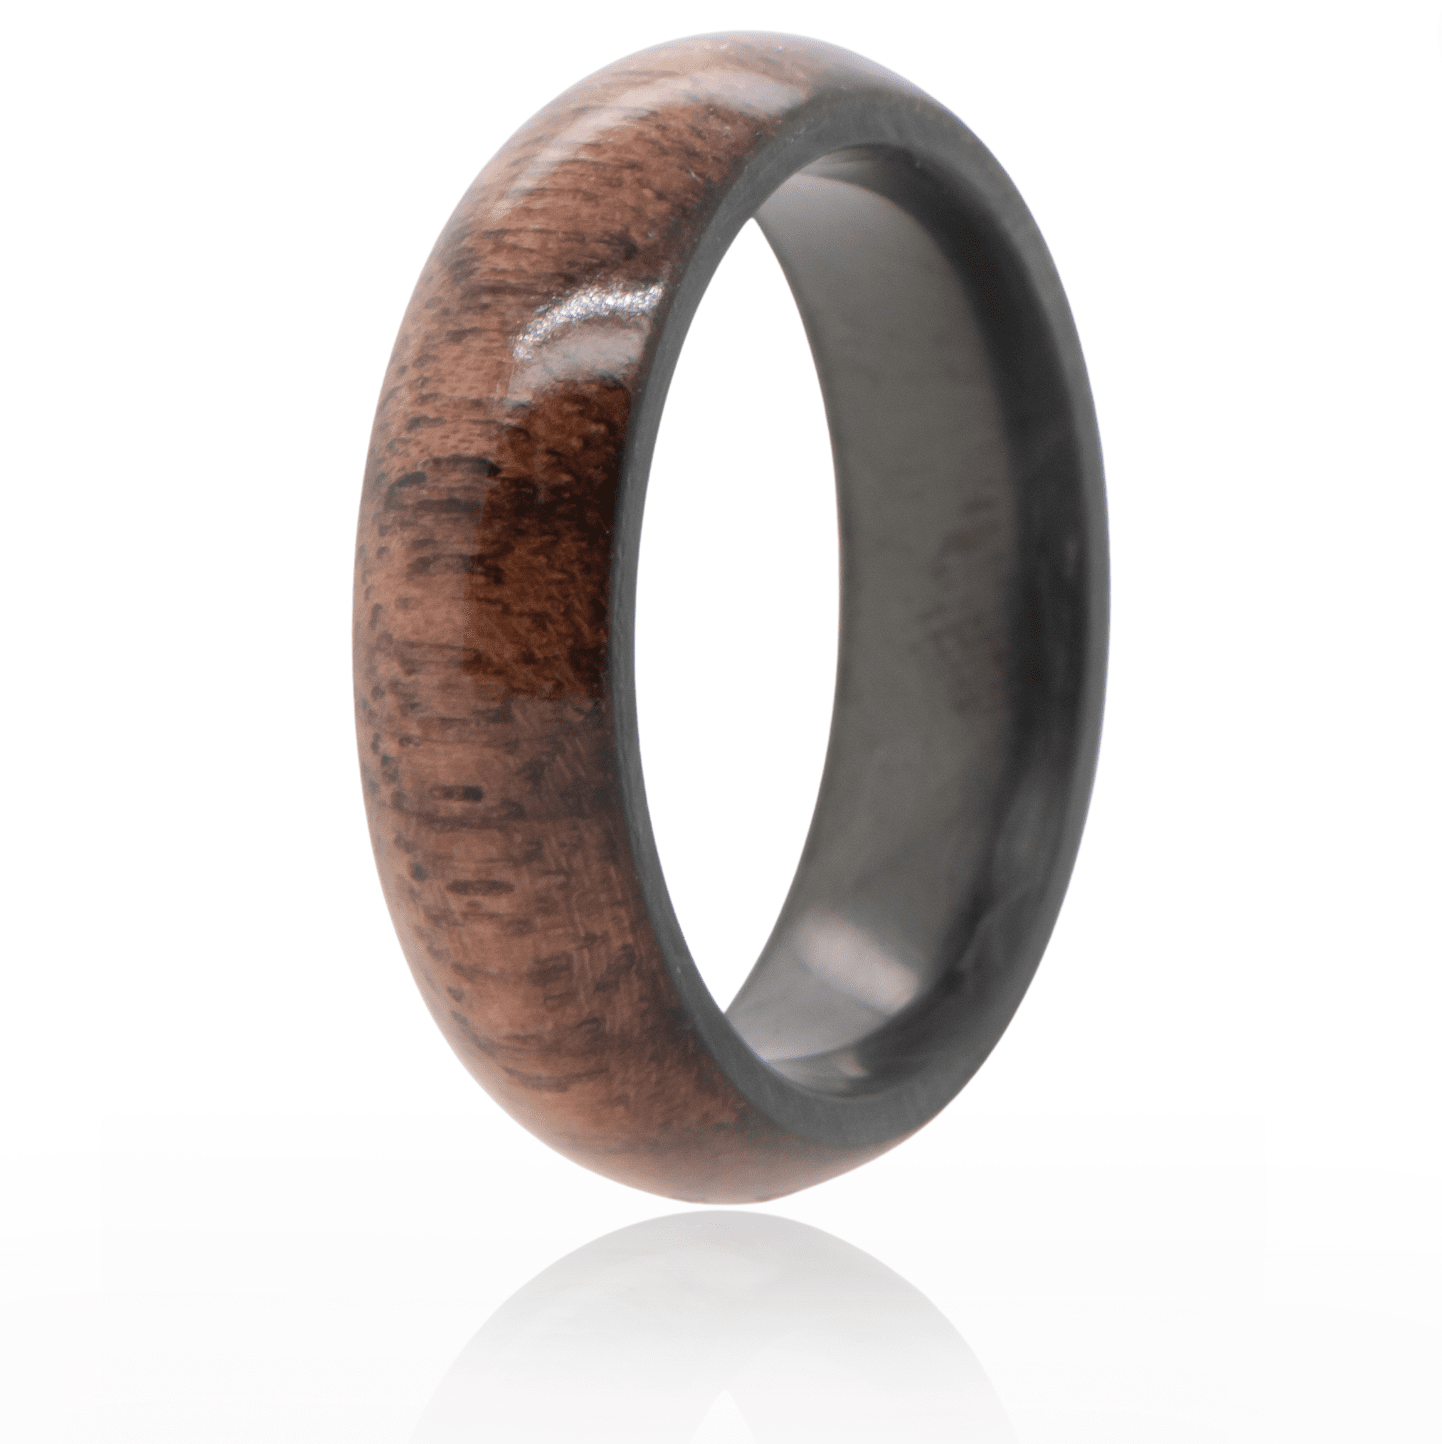 Walnut wood ring with forged carbon fiber interior. 